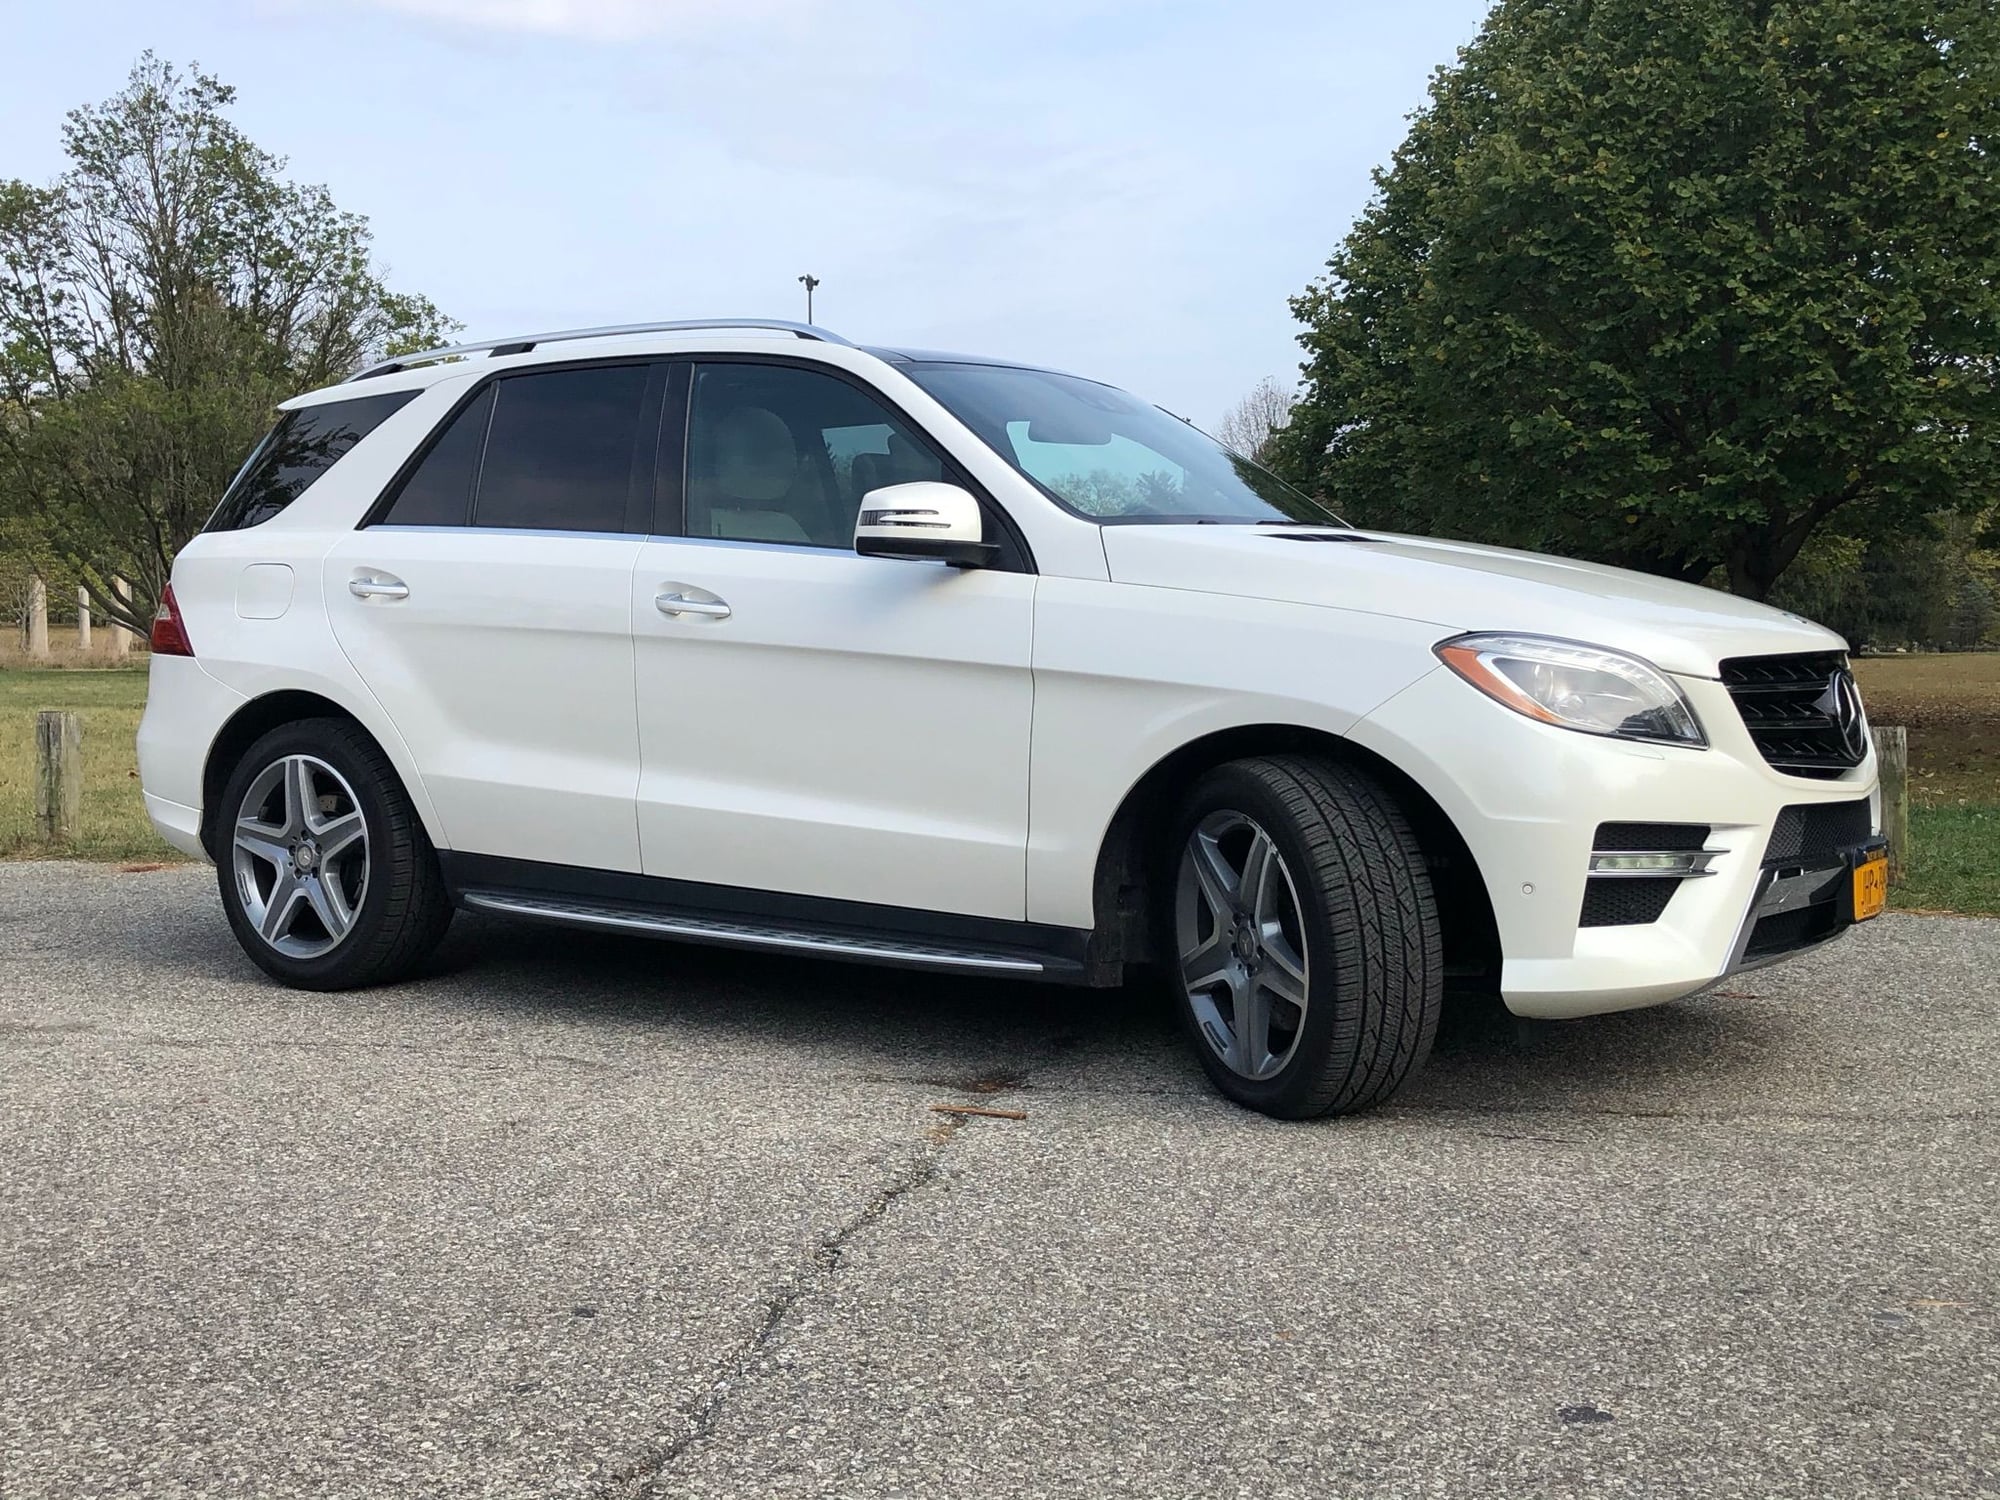 2013 Mercedes-Benz ML550 - 2013 Mercedes ML550 w/ On-Off Road Package - Used - VIN 4JGDA7DB7DA062882 - 179,000 Miles - 8 cyl - AWD - Automatic - SUV - White - Indianapolis, IN 46205, United States